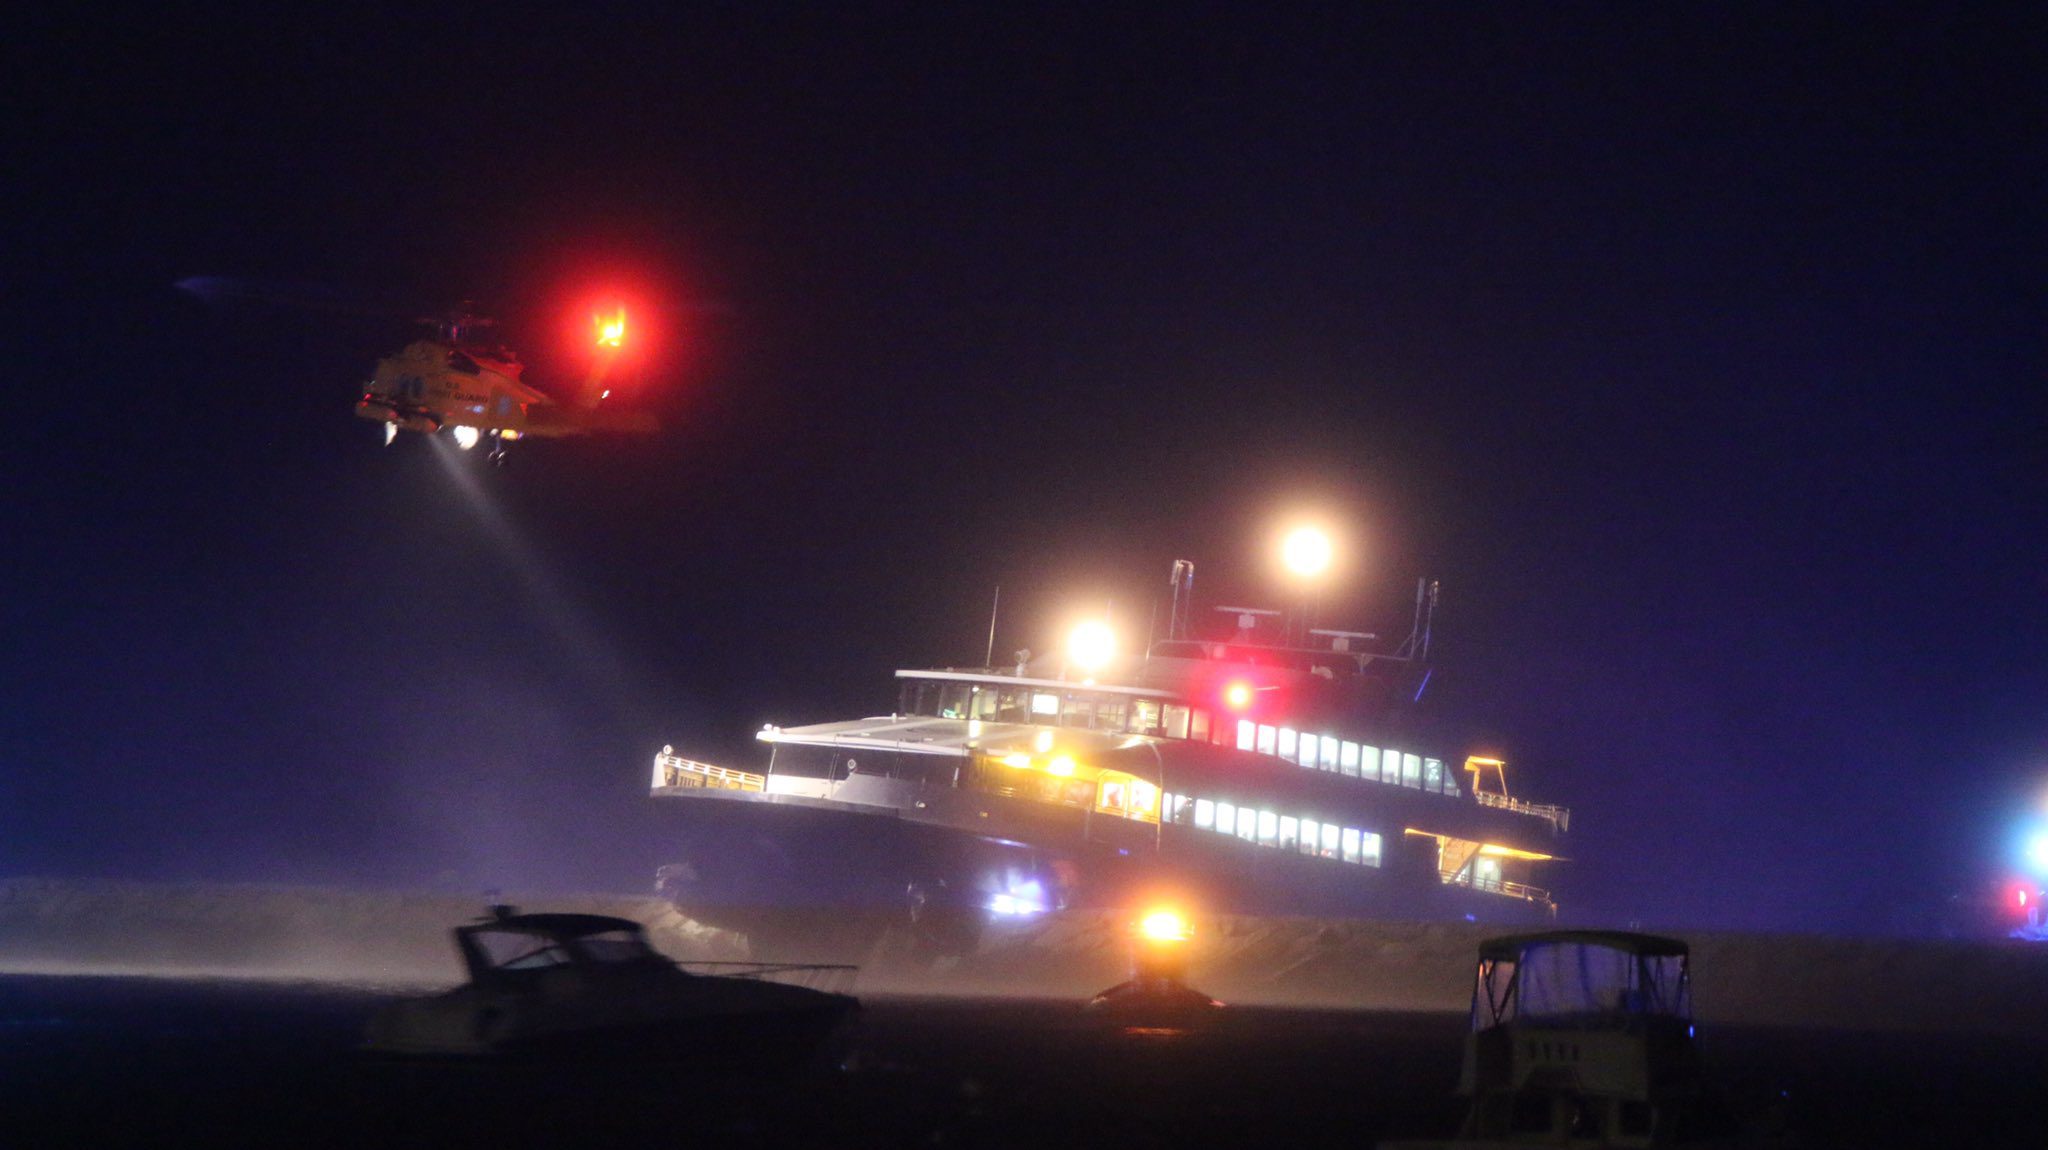 55 Rescued From Grounded Nantucket Ferry